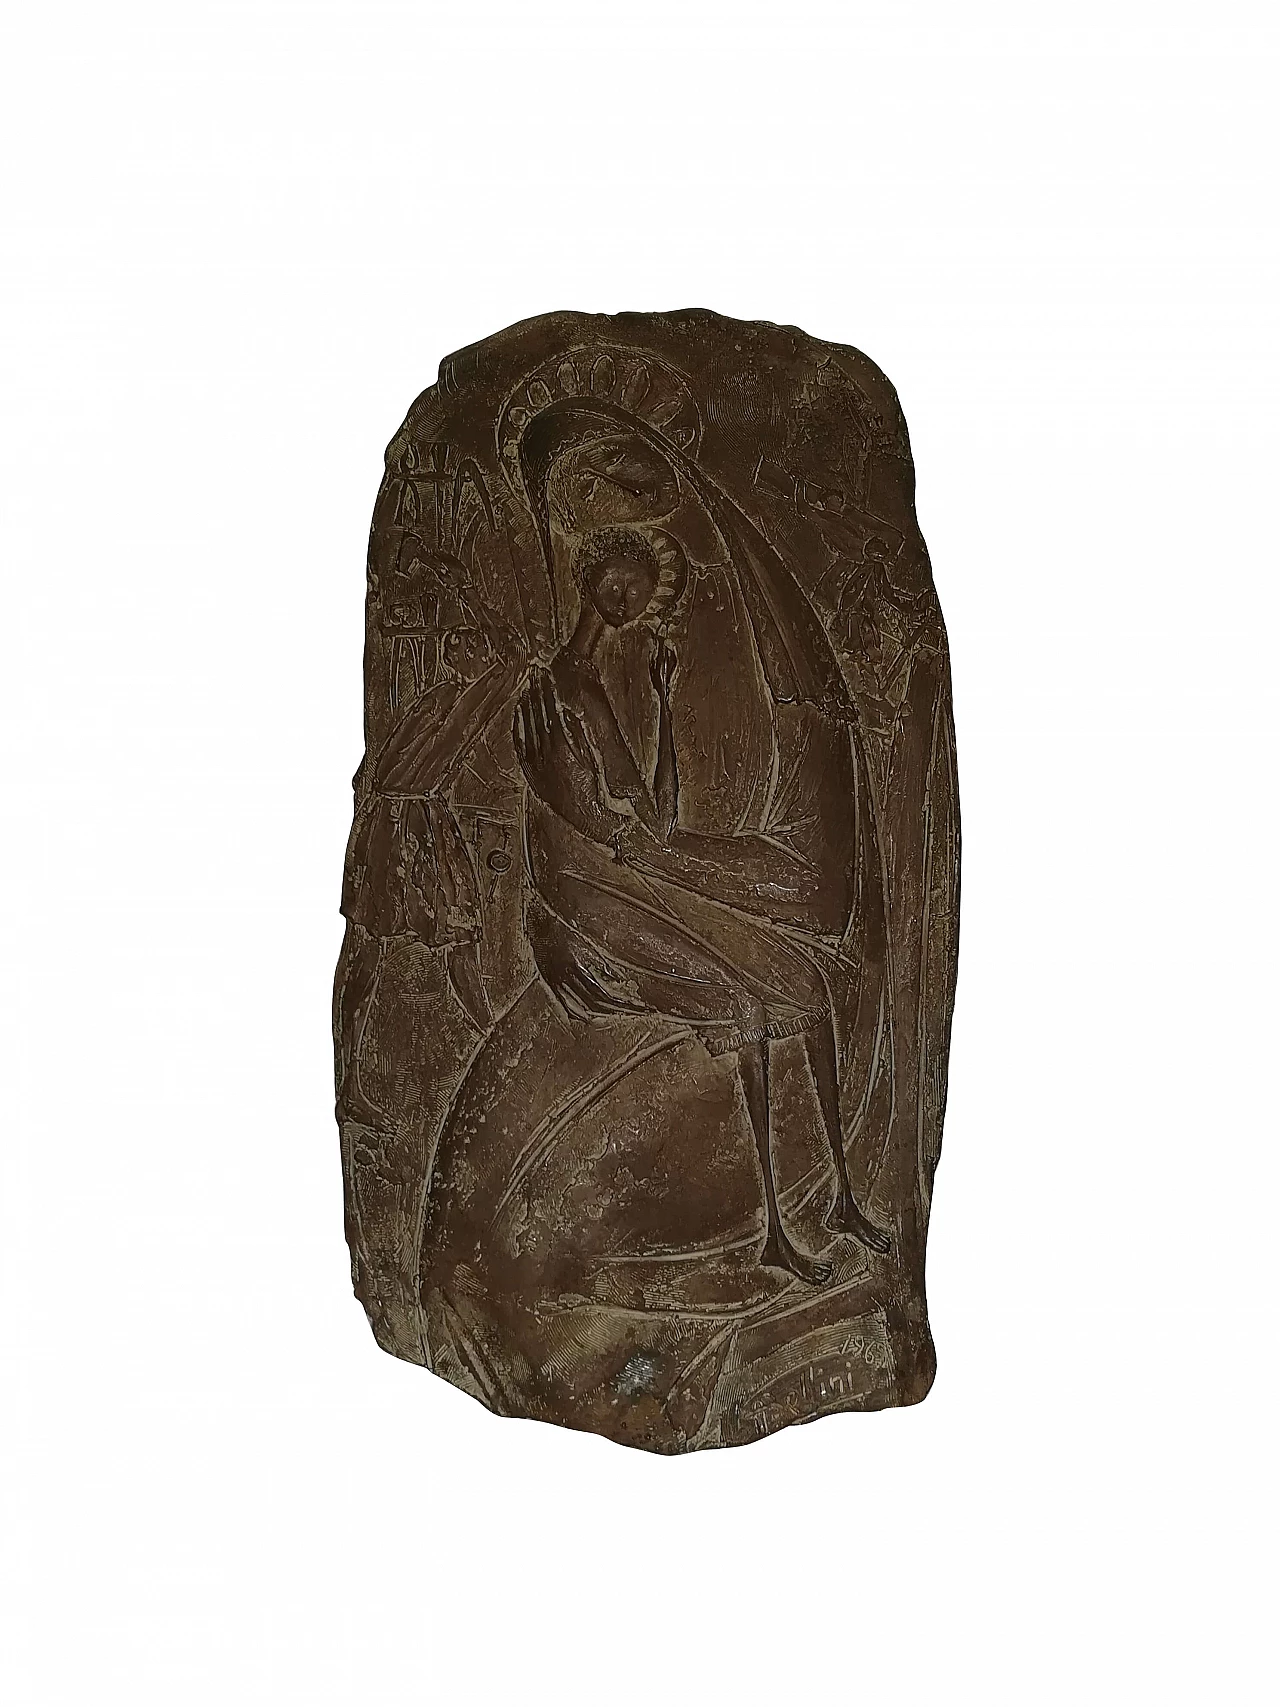 Virgin Mary and Child in bronze by Bellini, 1960s 1079409